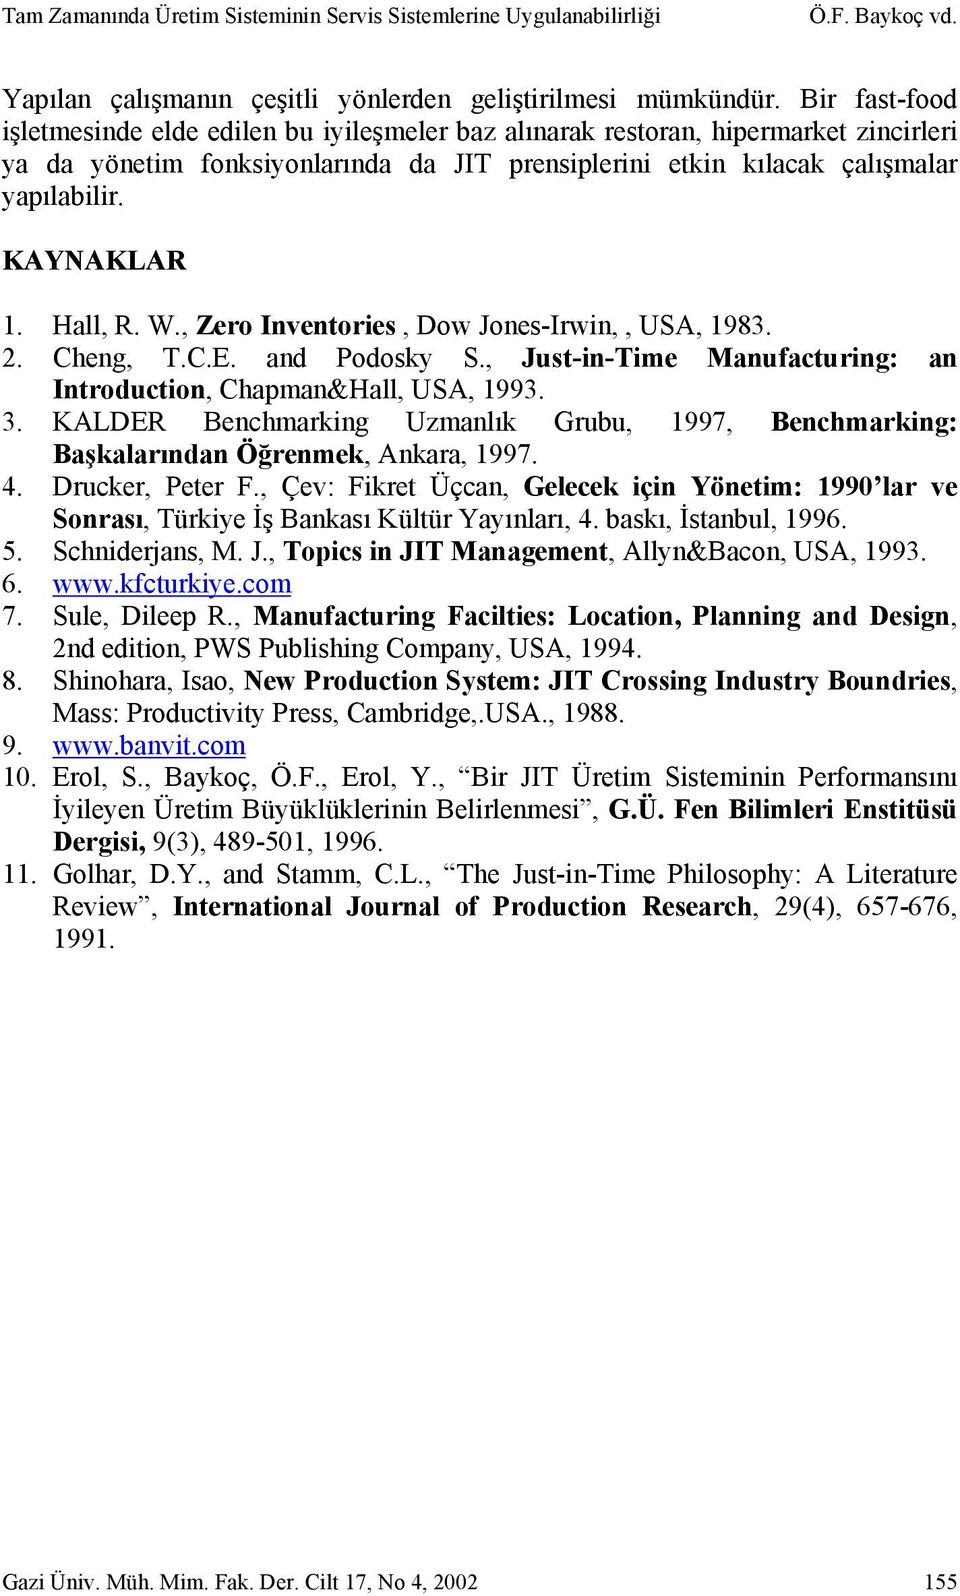 KAYNAKLAR 1. Hall, R. W., Zero Inventories, Dow Jones-Irwin,, USA, 1983. 2. Cheng, T.C.E. and Podosky S., Just-in-Time Manufacturing: an Introduction, Chapman&Hall, USA, 1993. 3.